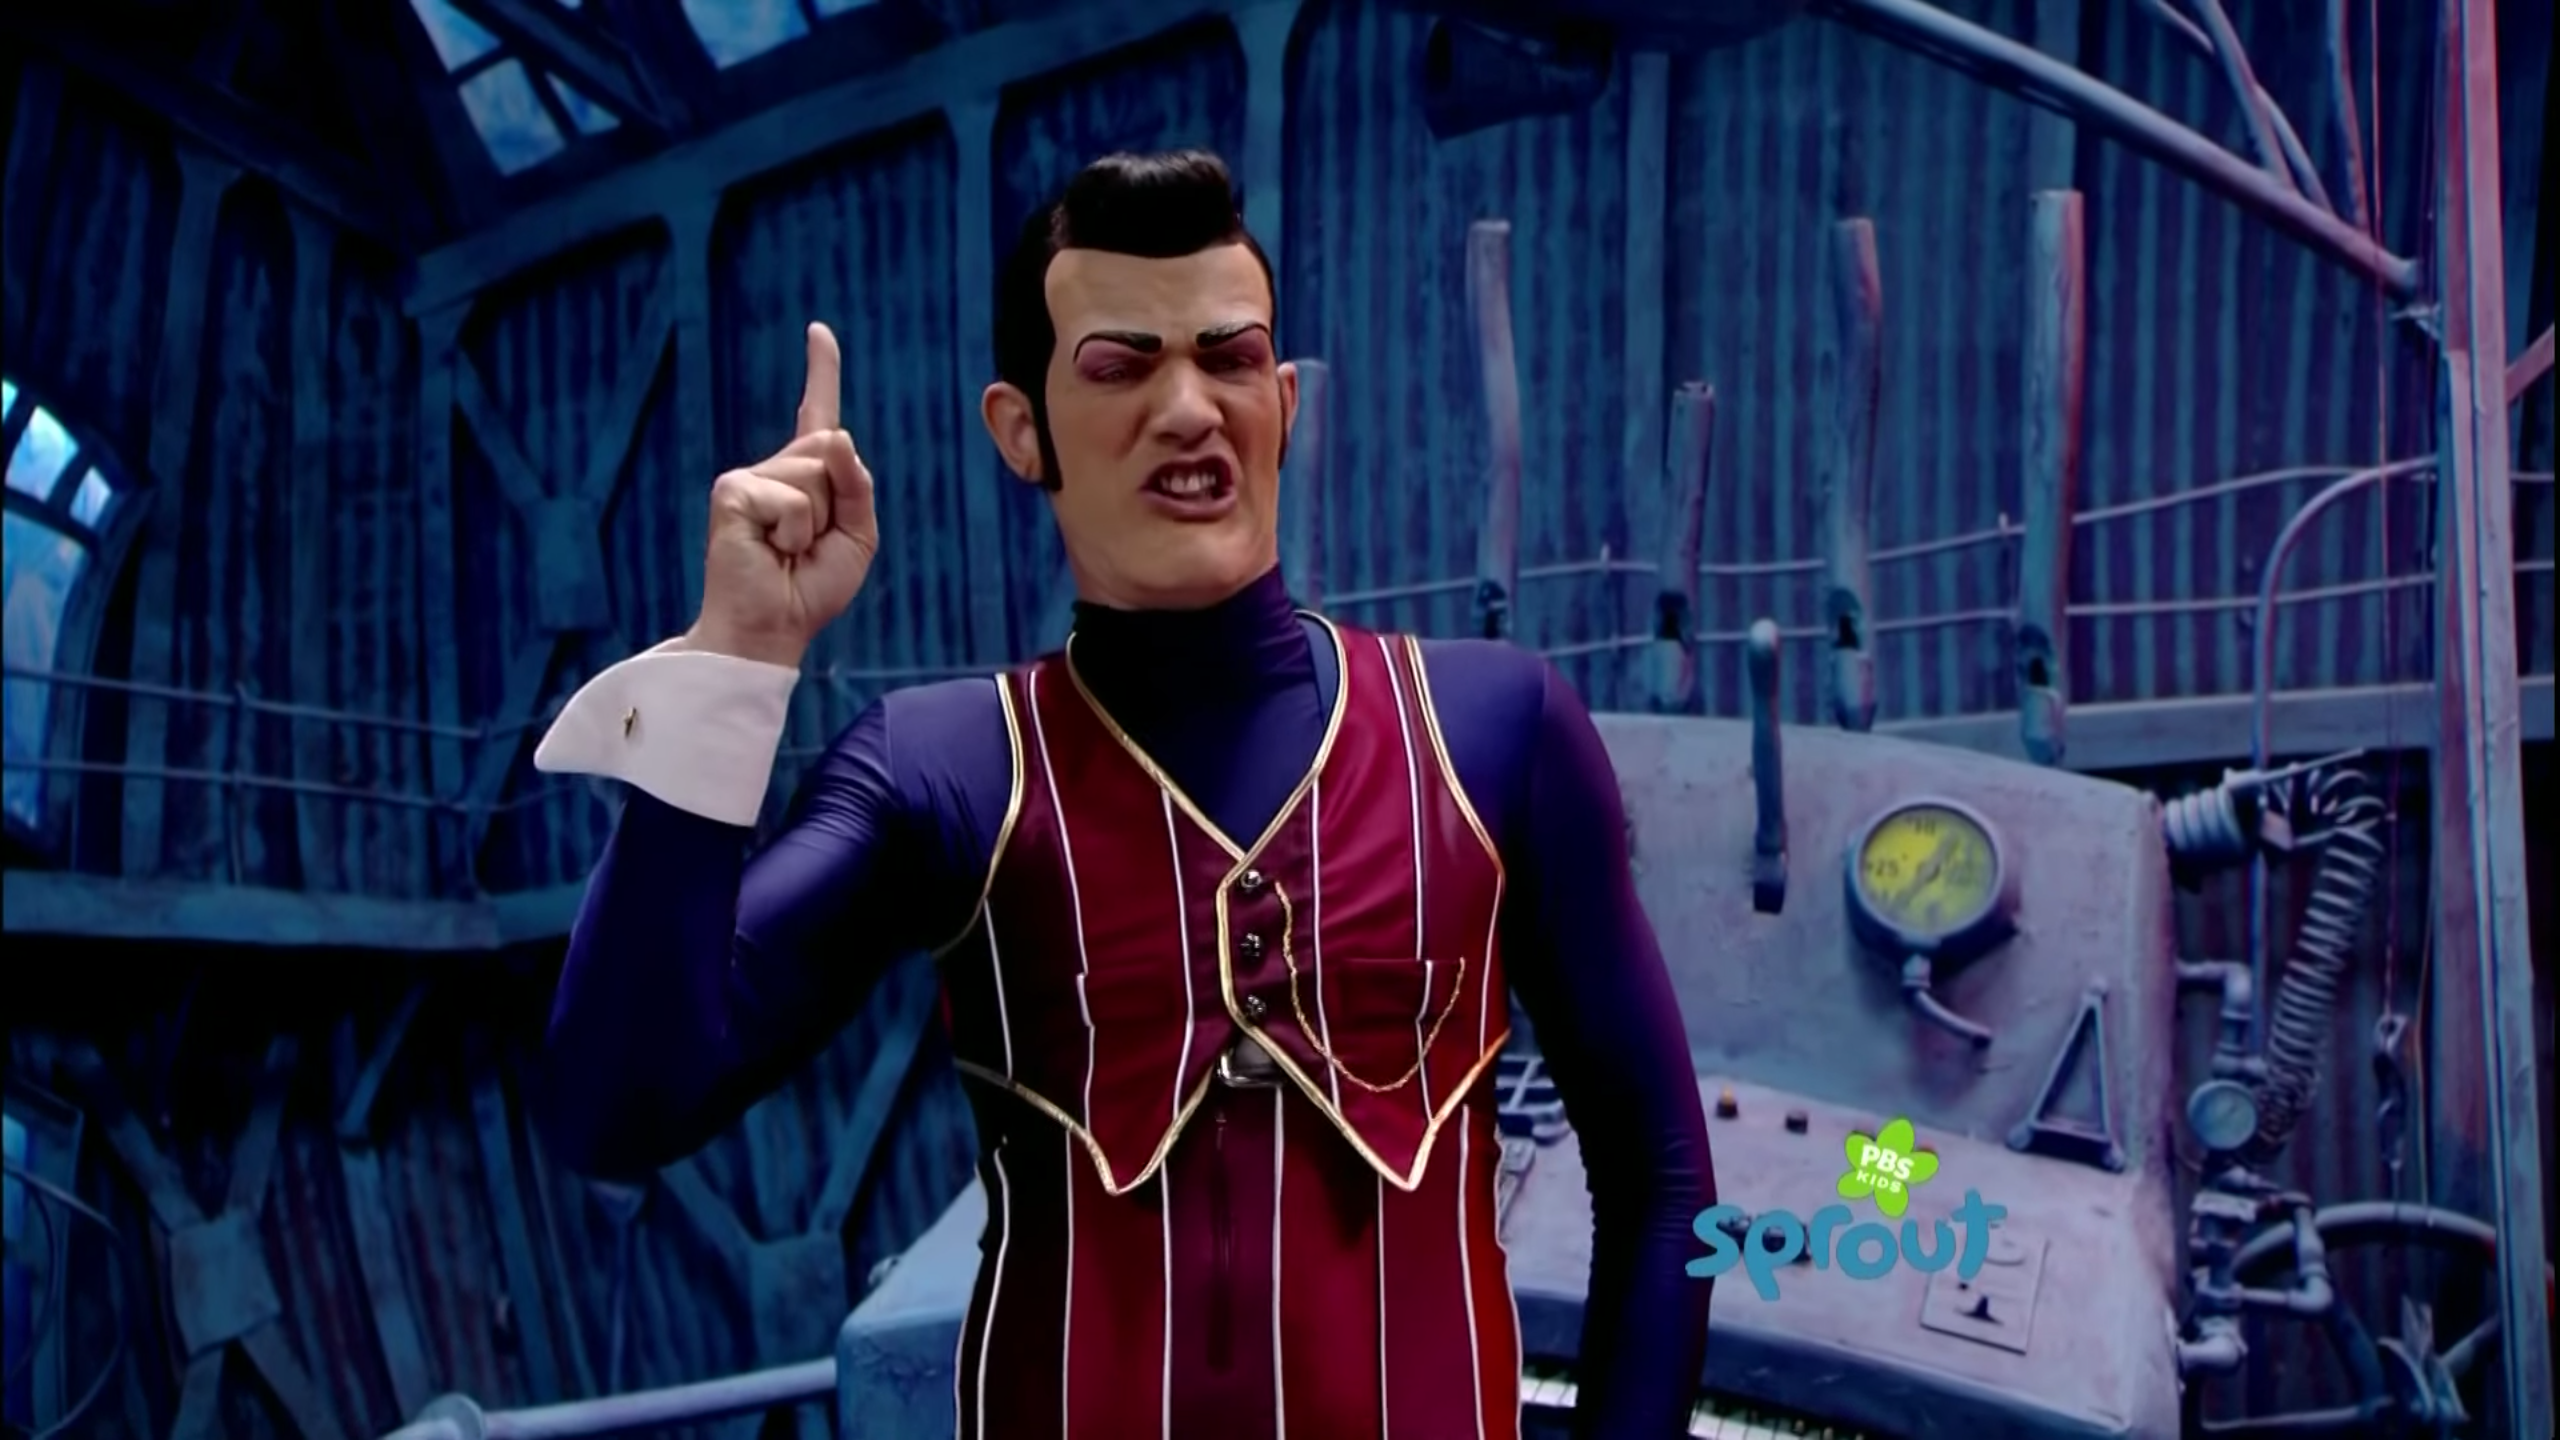 We are number one Стефан Карл Стефанссон